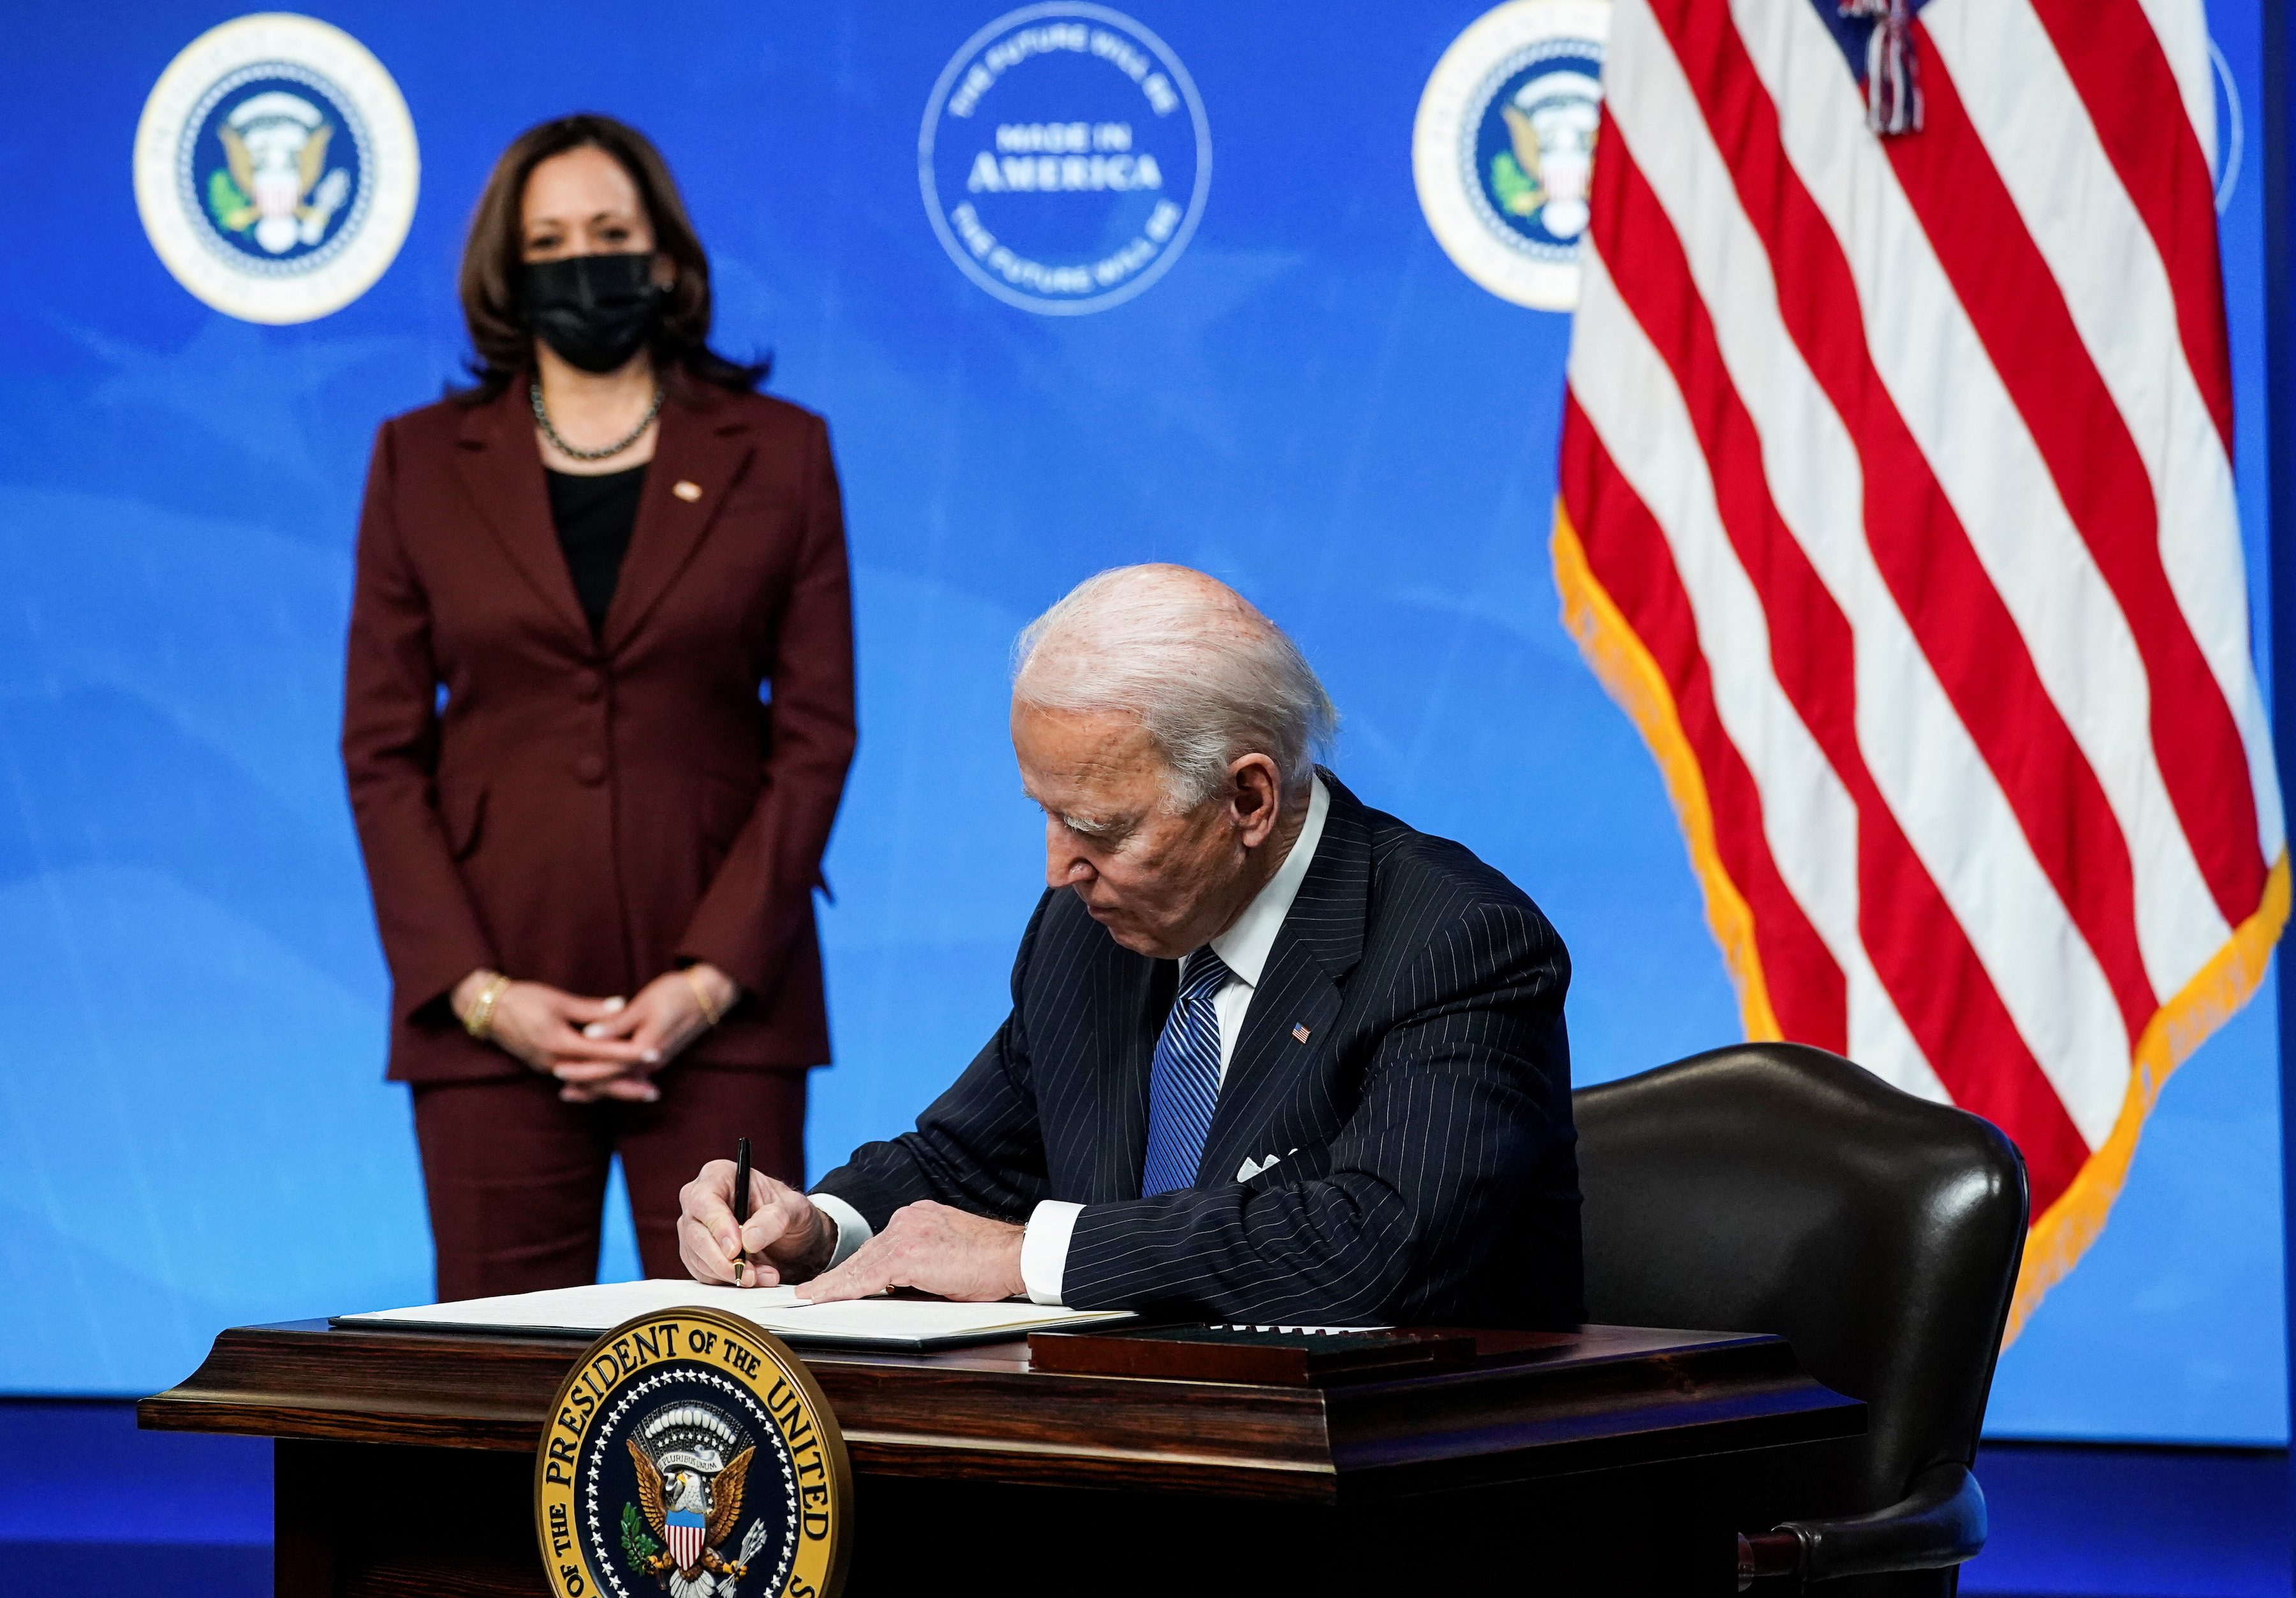 Biden signs ‘Buy American’ order, pledges to renew US manufacturing